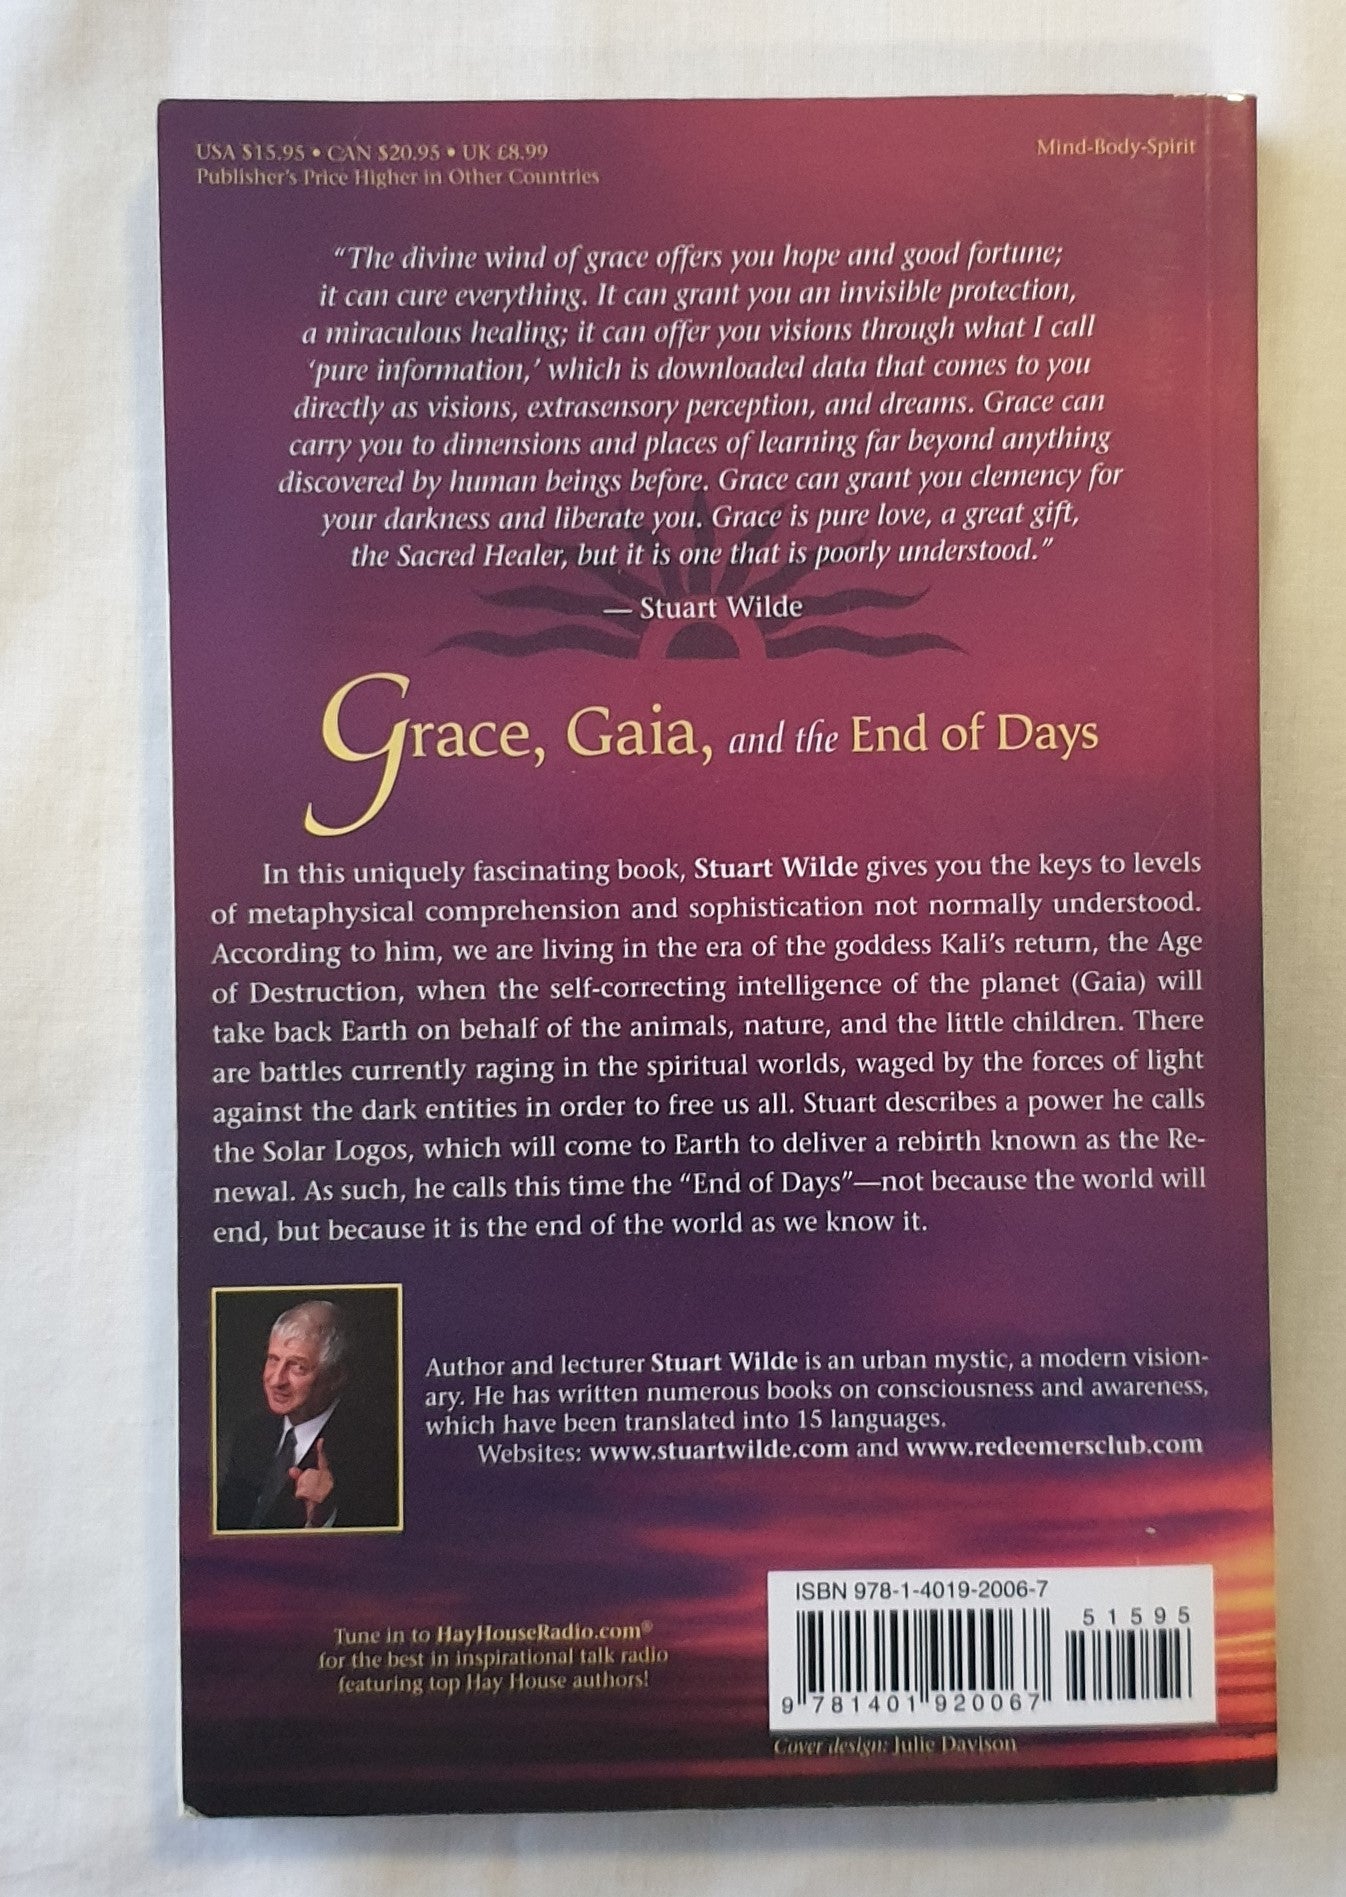 Grace, Gaia, and the End of Days by Stuart Wilde